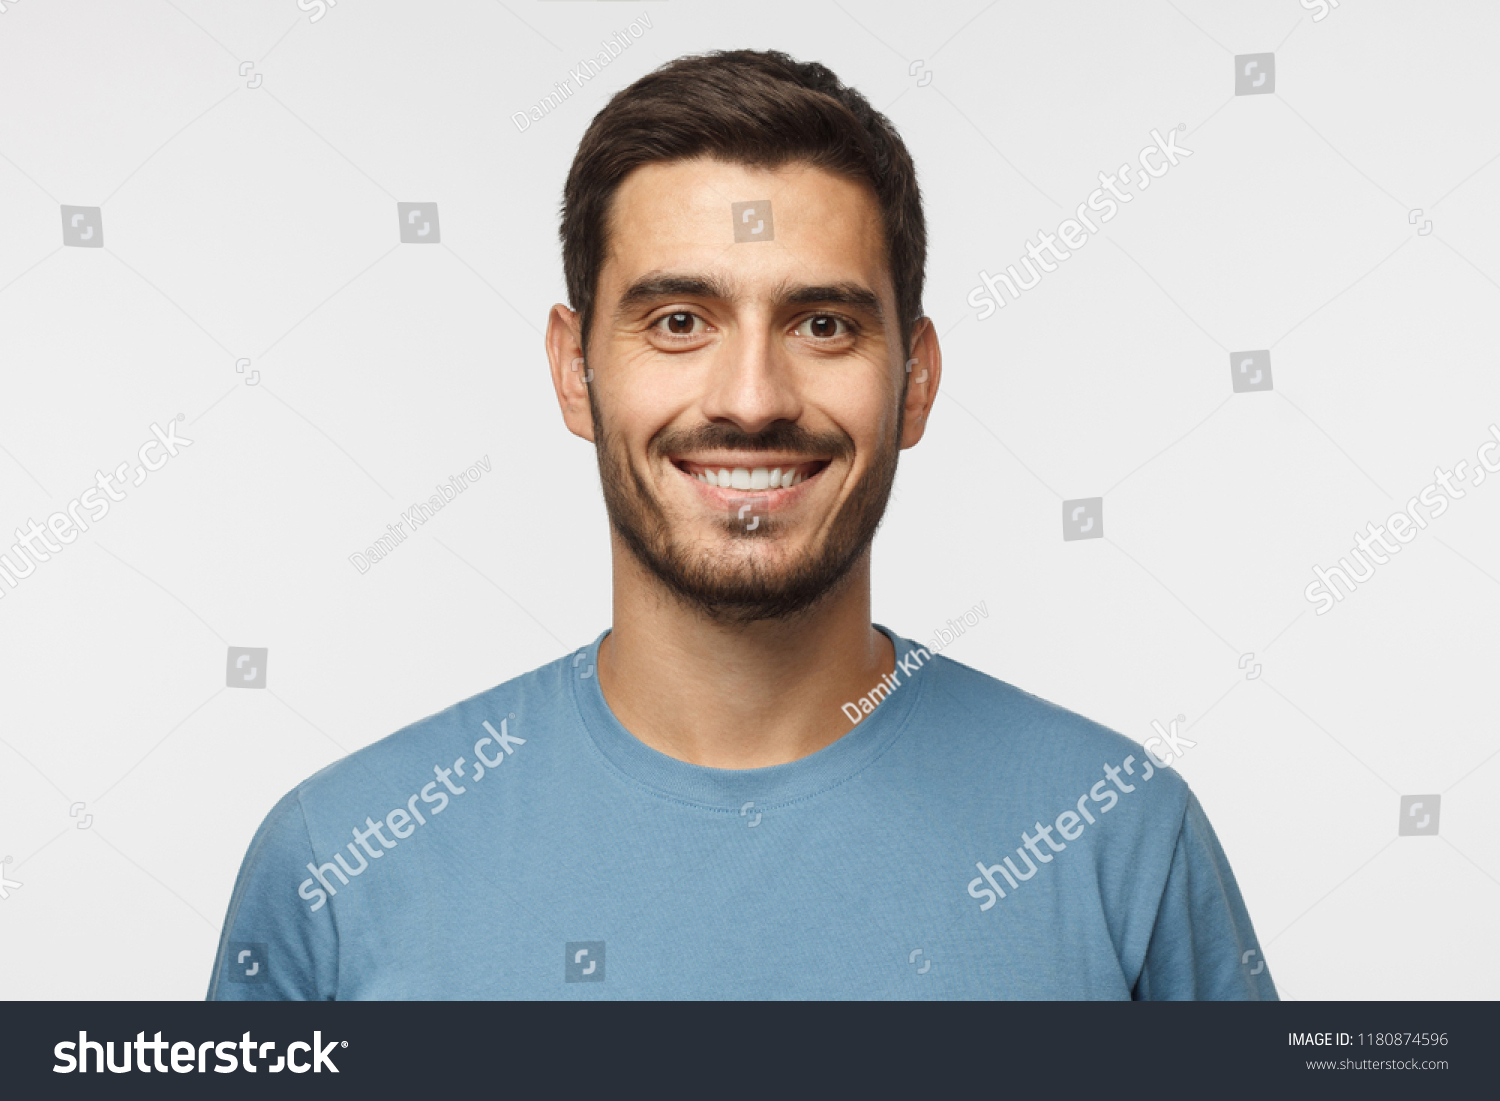 Close up portrait of young smiling handsome guy in blue t-shirt isolated on gray background #1180874596